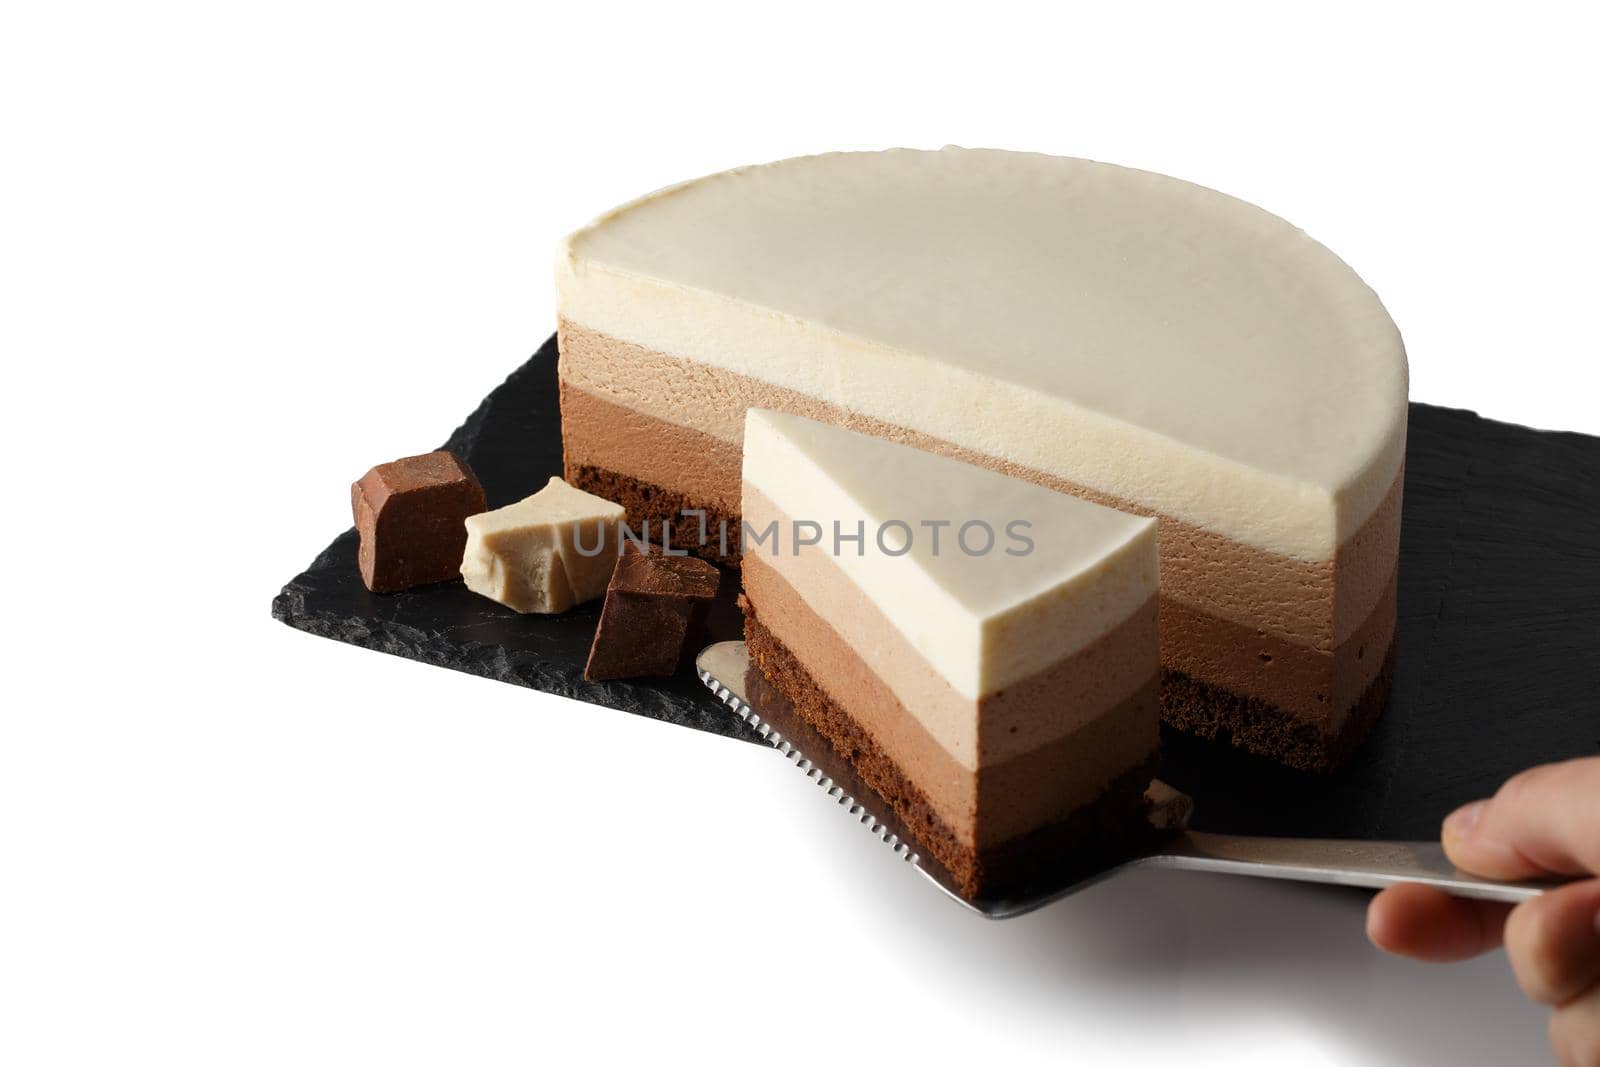 Delicious cake with three different kind of chocolate on plate of shale. Isolated on white background. Cook picks up a cut piece of cake on a pastry spatula.